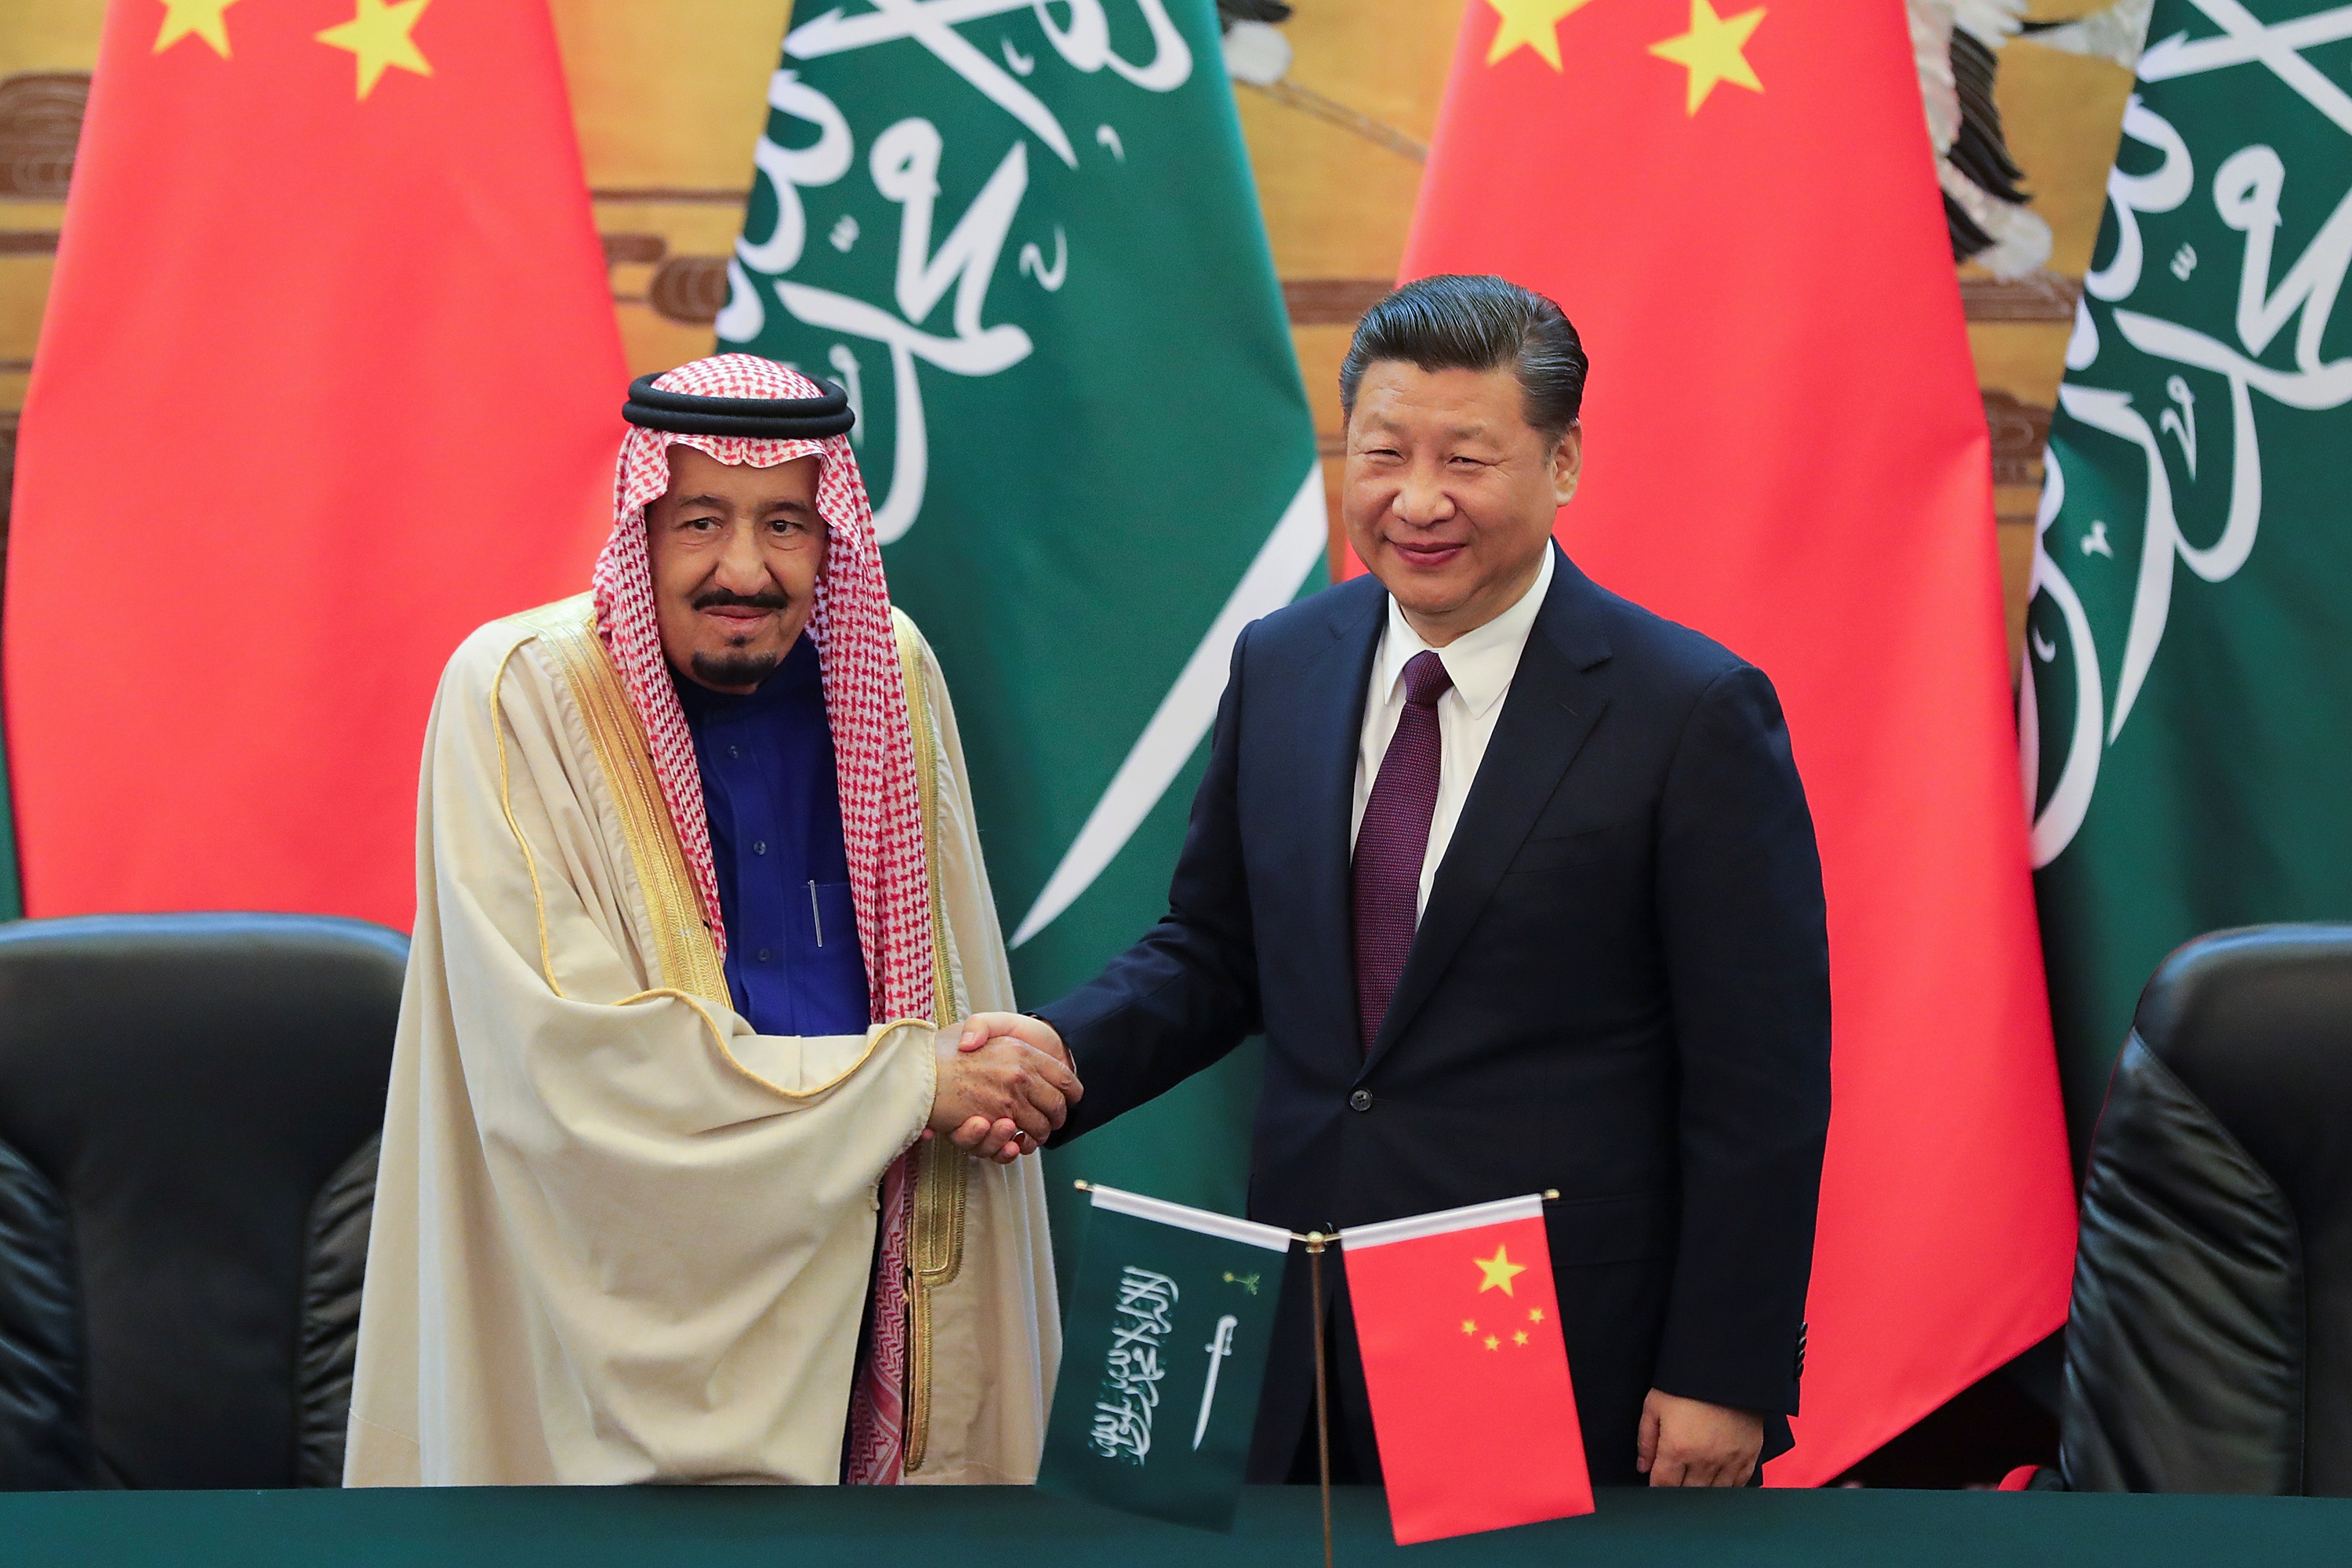 China's President Xi Jinping (R) and Saudi Arabia's King Salman bin Abdulaziz Al-Saud shake hands during a signing ceremony at the Great Hall of the People in Beijing, China March 16, 2017. REUTERS/Lintao Zhang/POOL